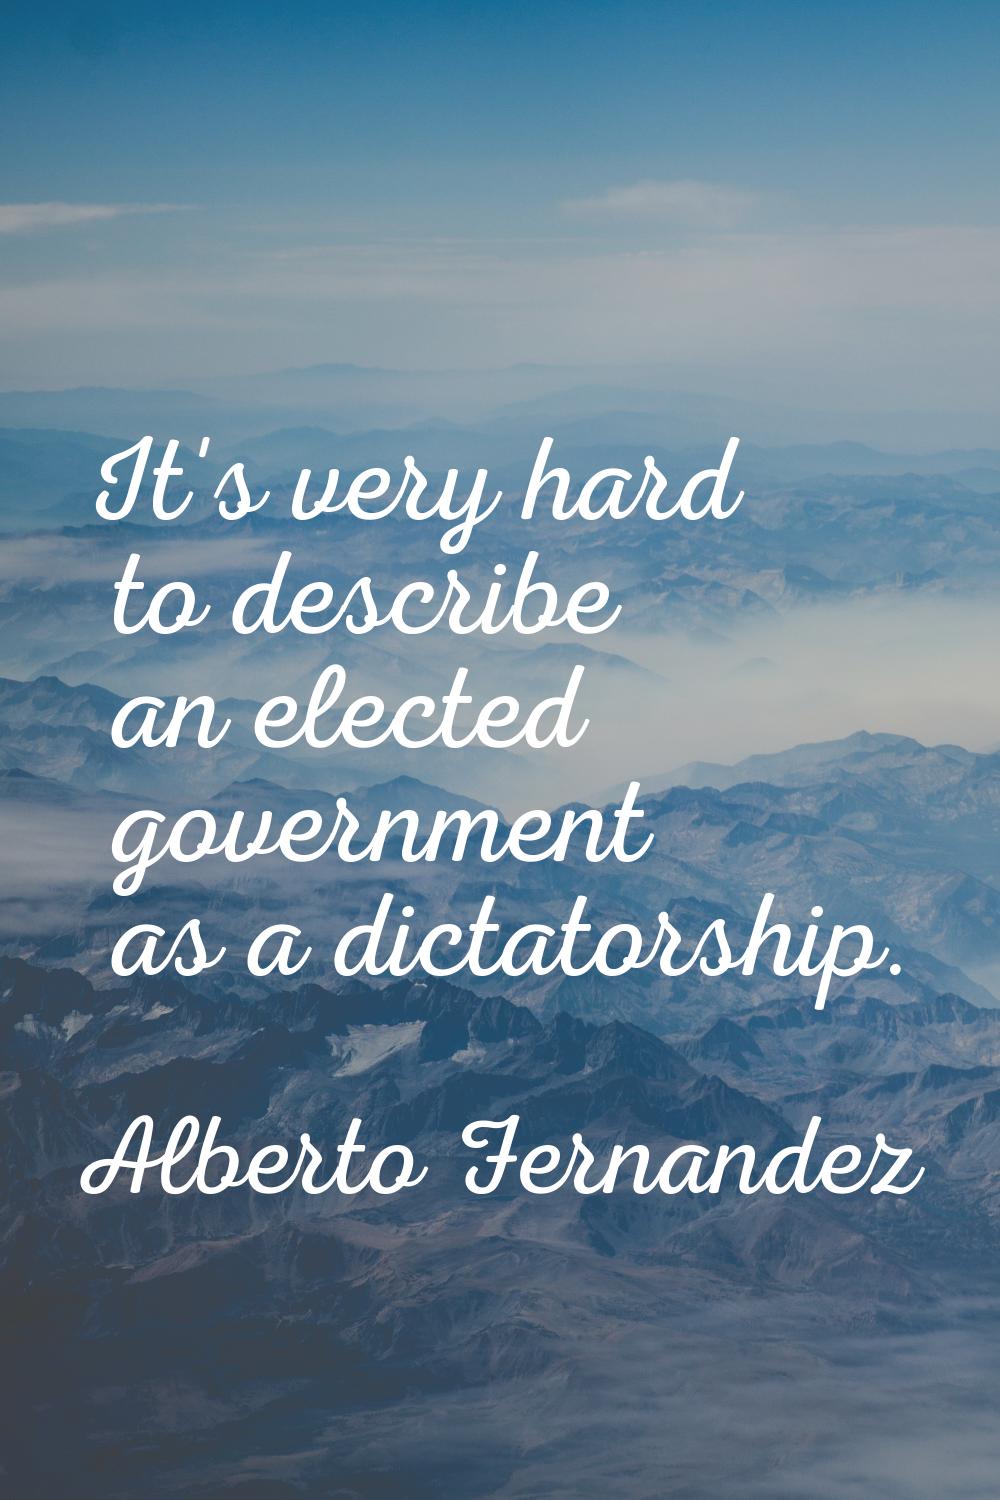 It's very hard to describe an elected government as a dictatorship.